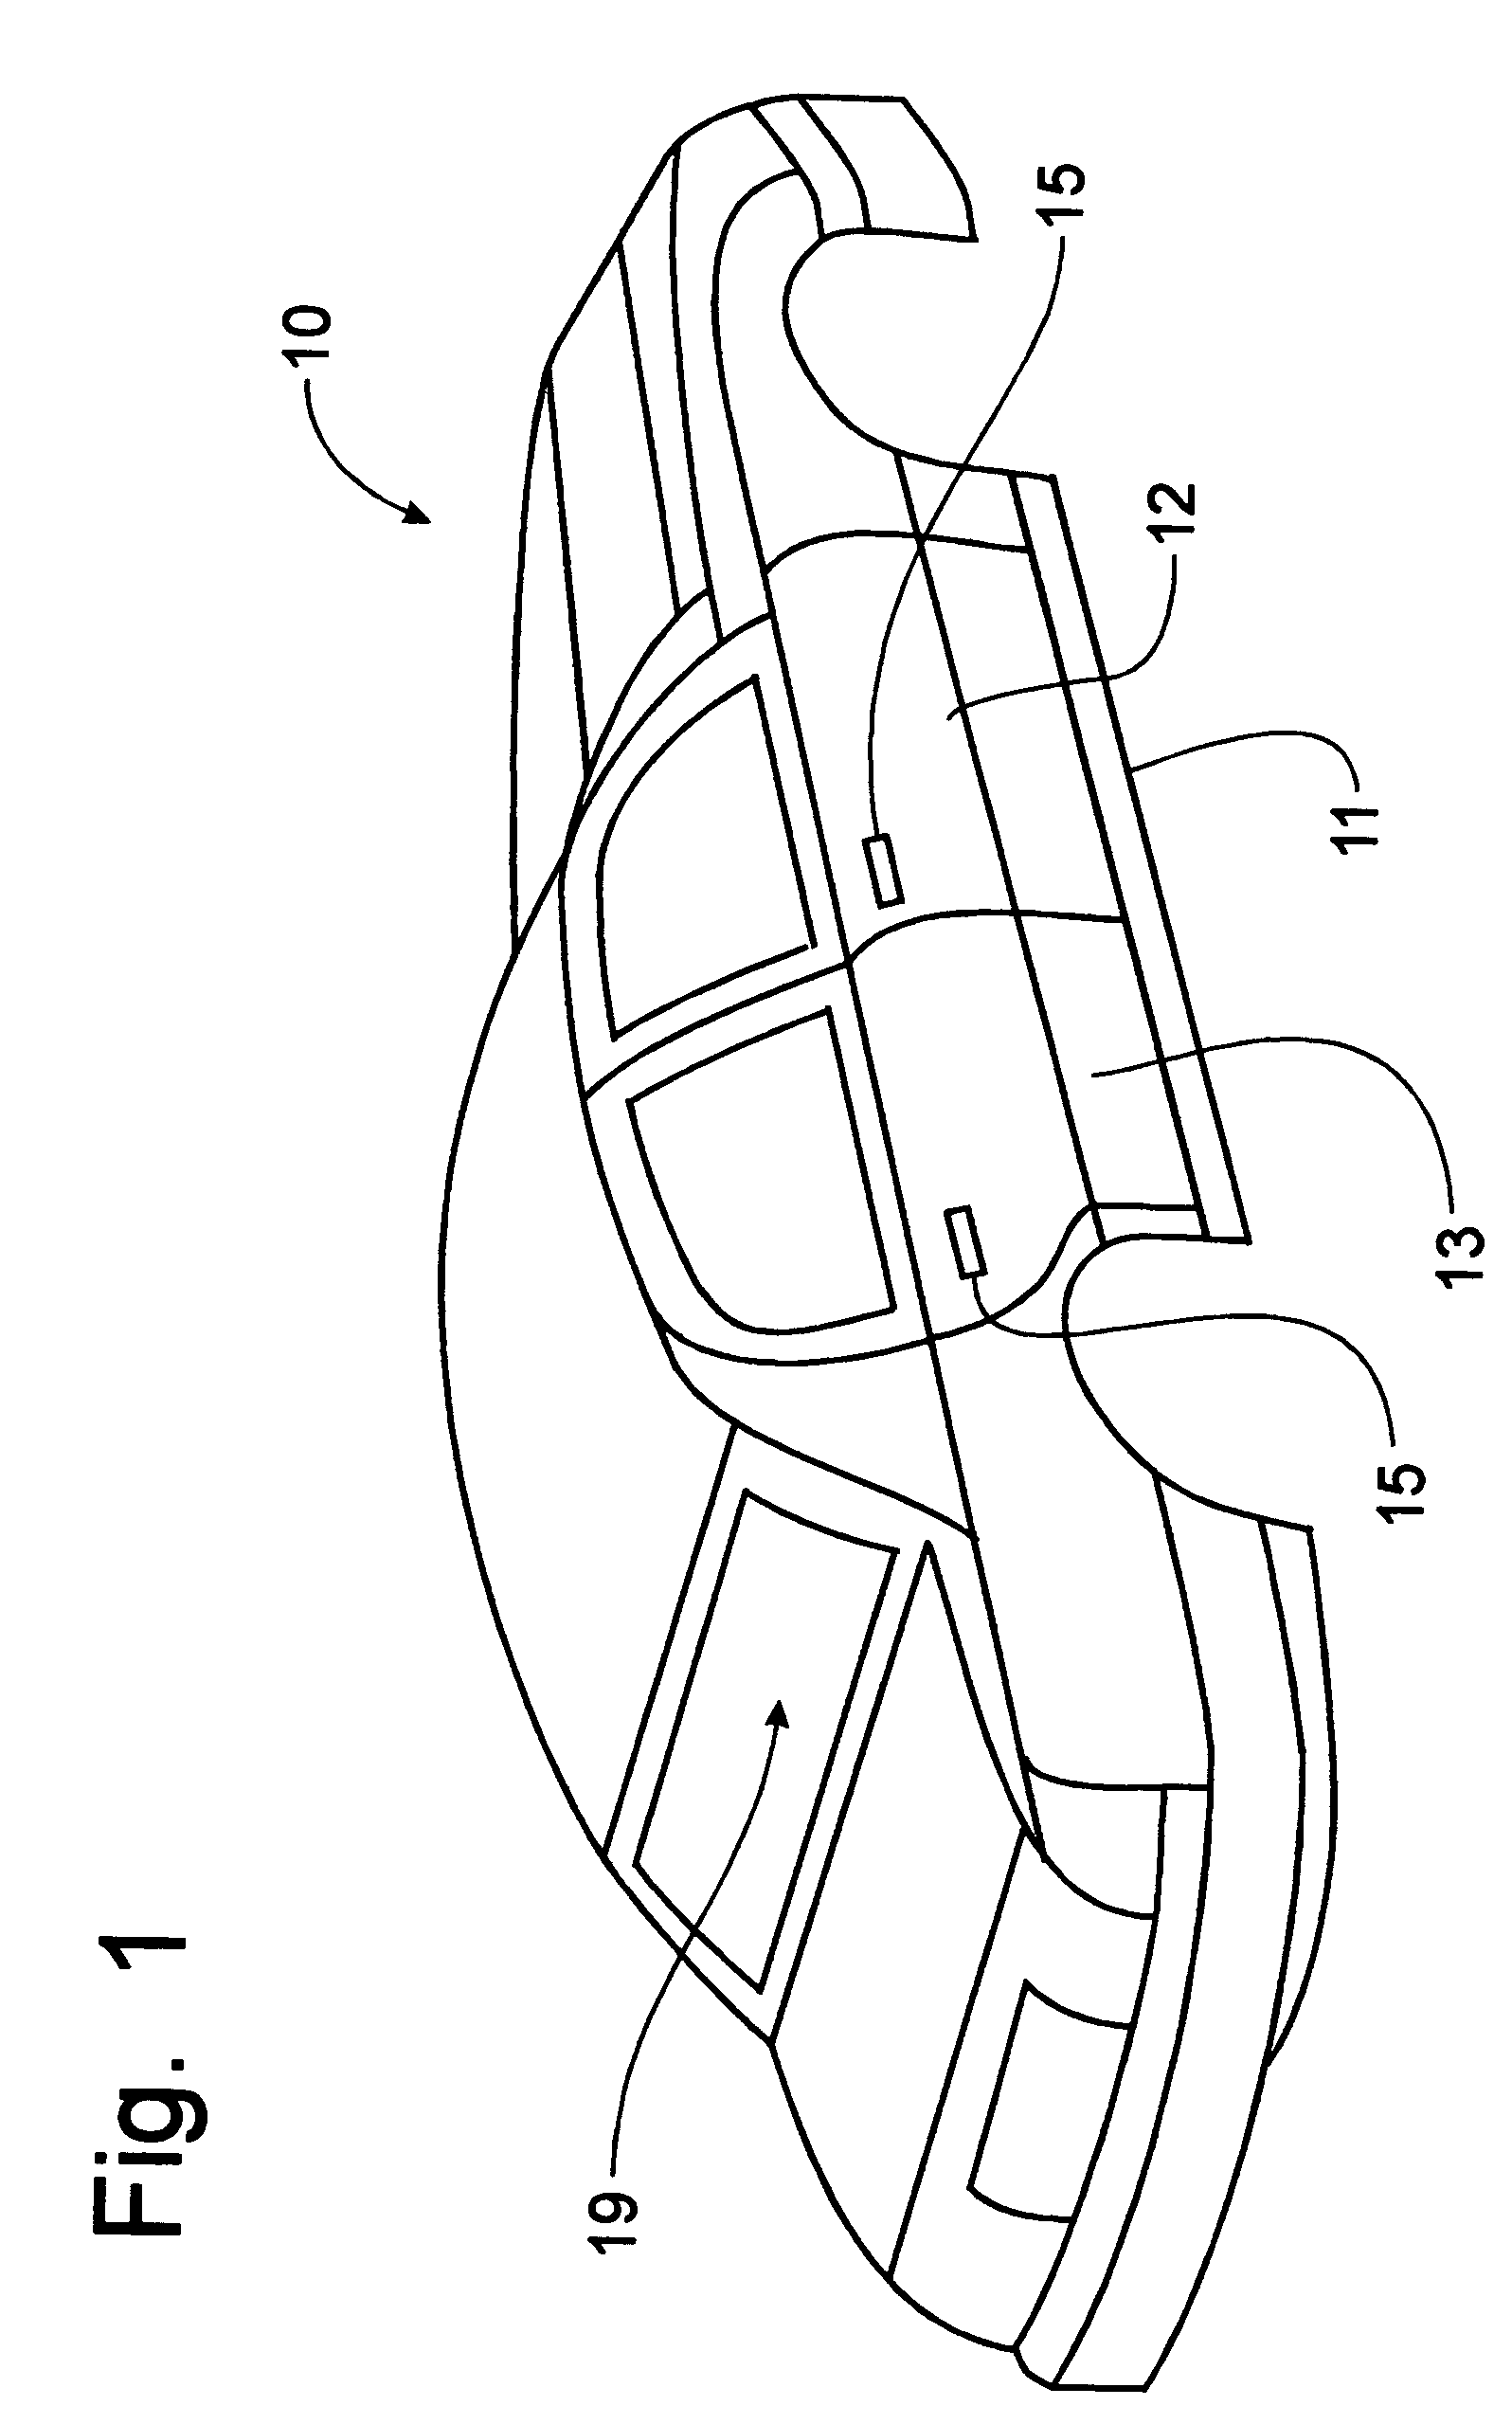 Apparatus for blocking the movement of an inertially activated component